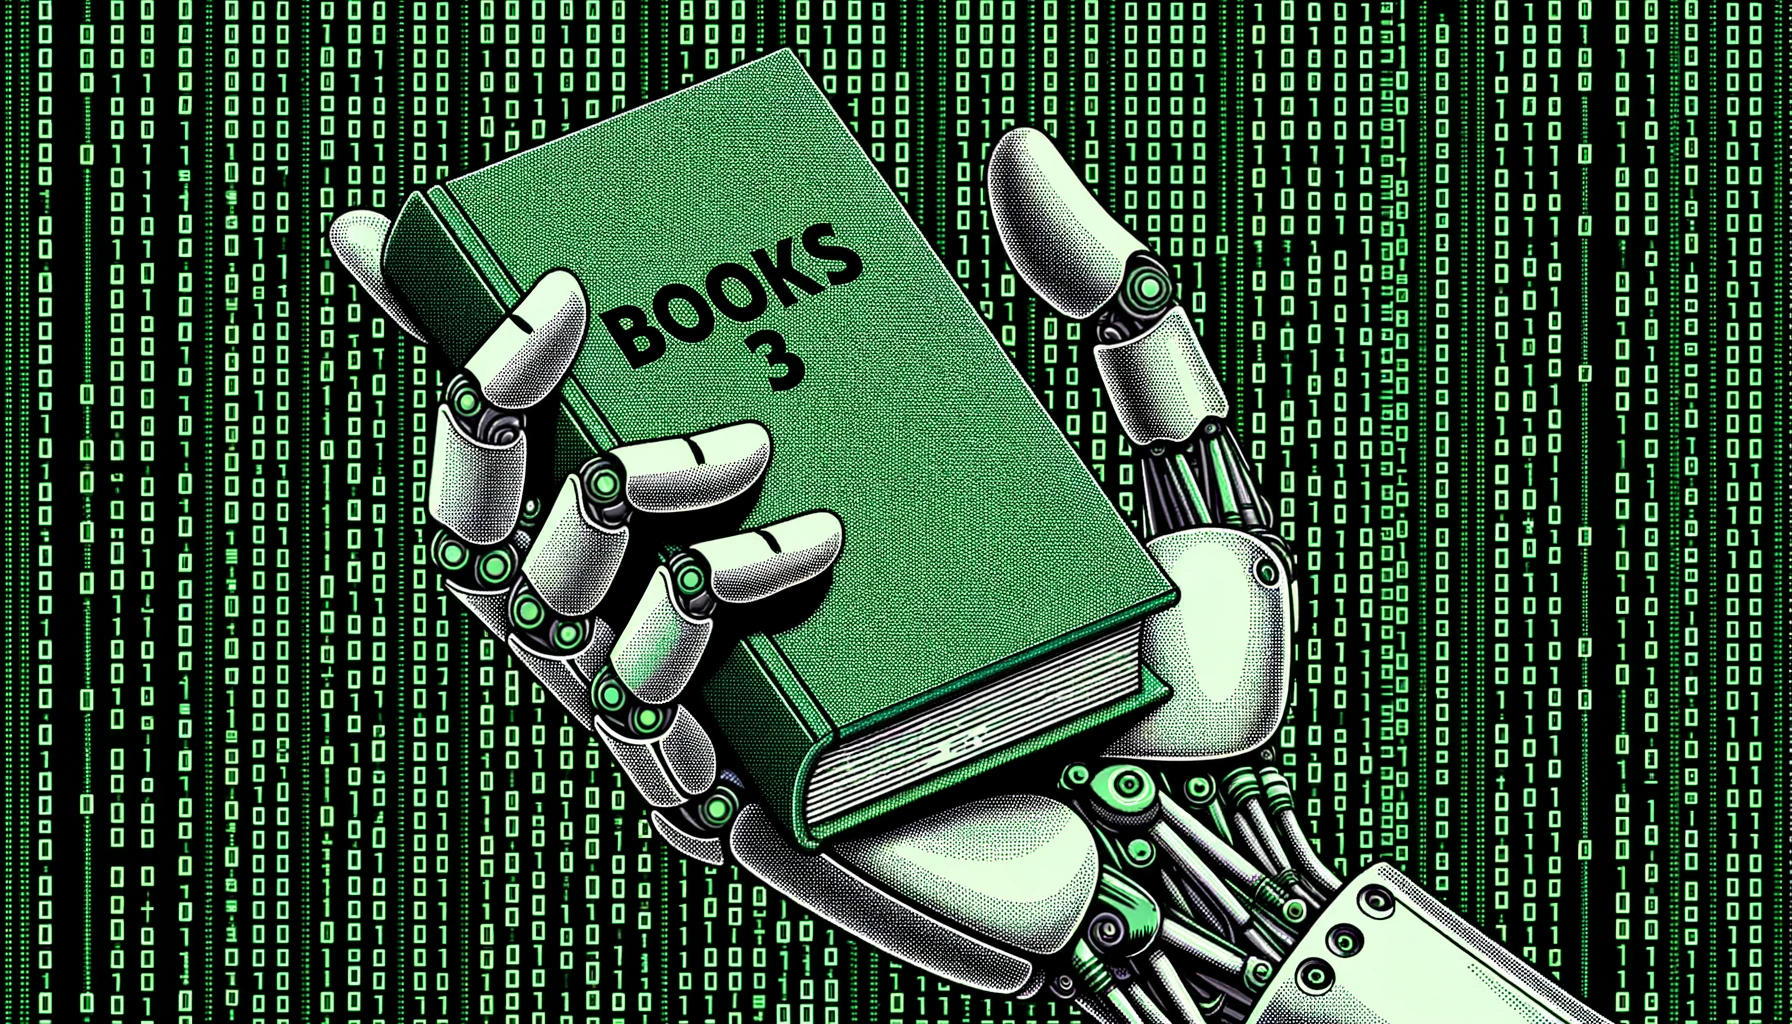 New lawsuit accuses Bloomberg, Microsoft, and Meta of training AI with pirated books